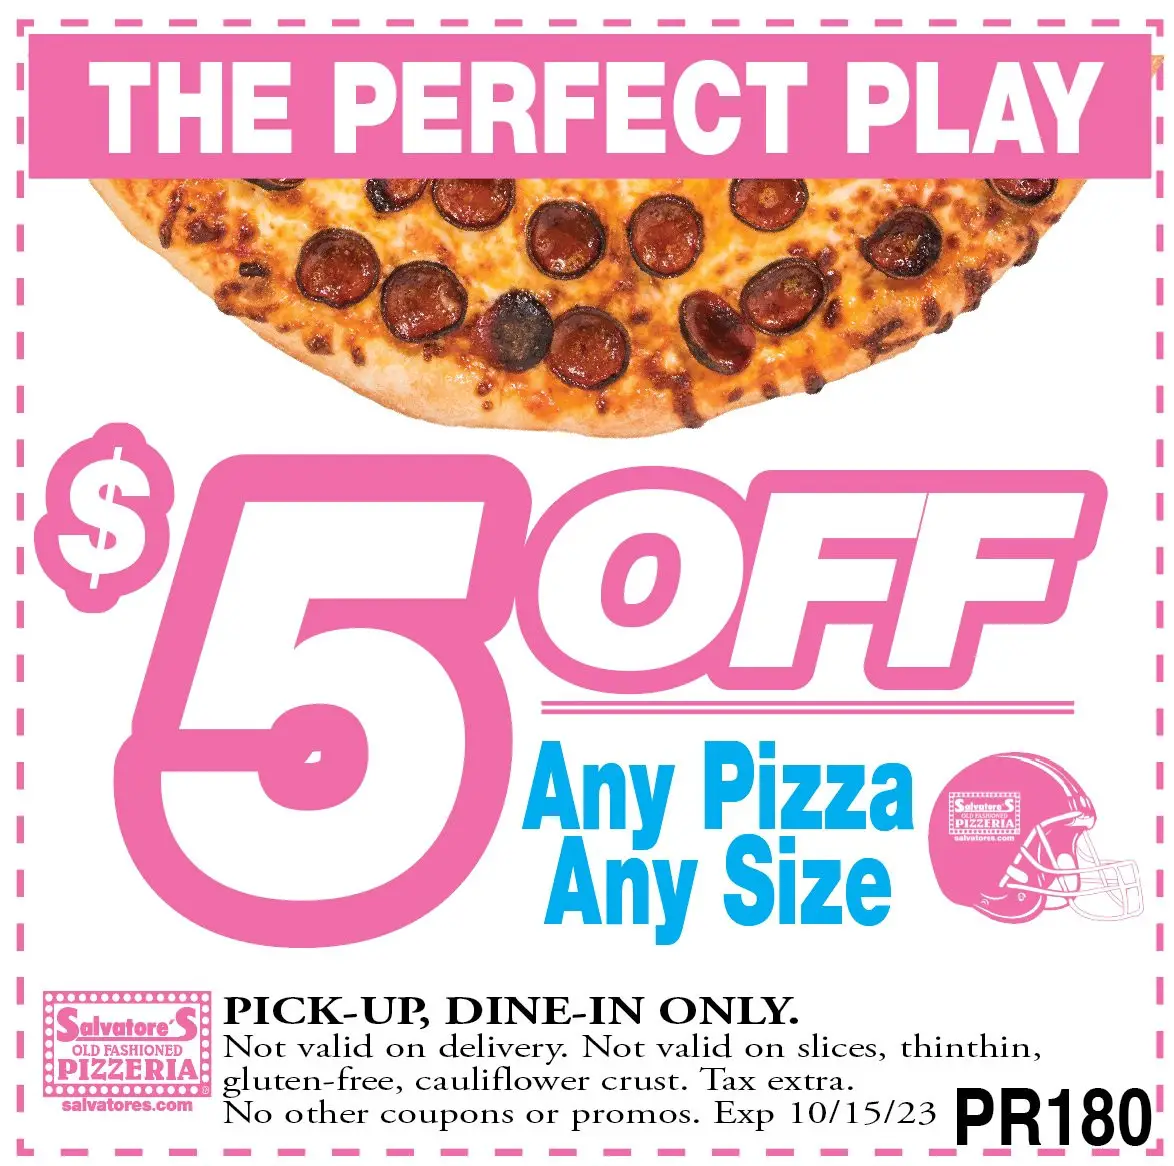 Salvatore's Pizzeria National Pepperoni Pizza Day Save $5 OFF Any Pizza, Any Size